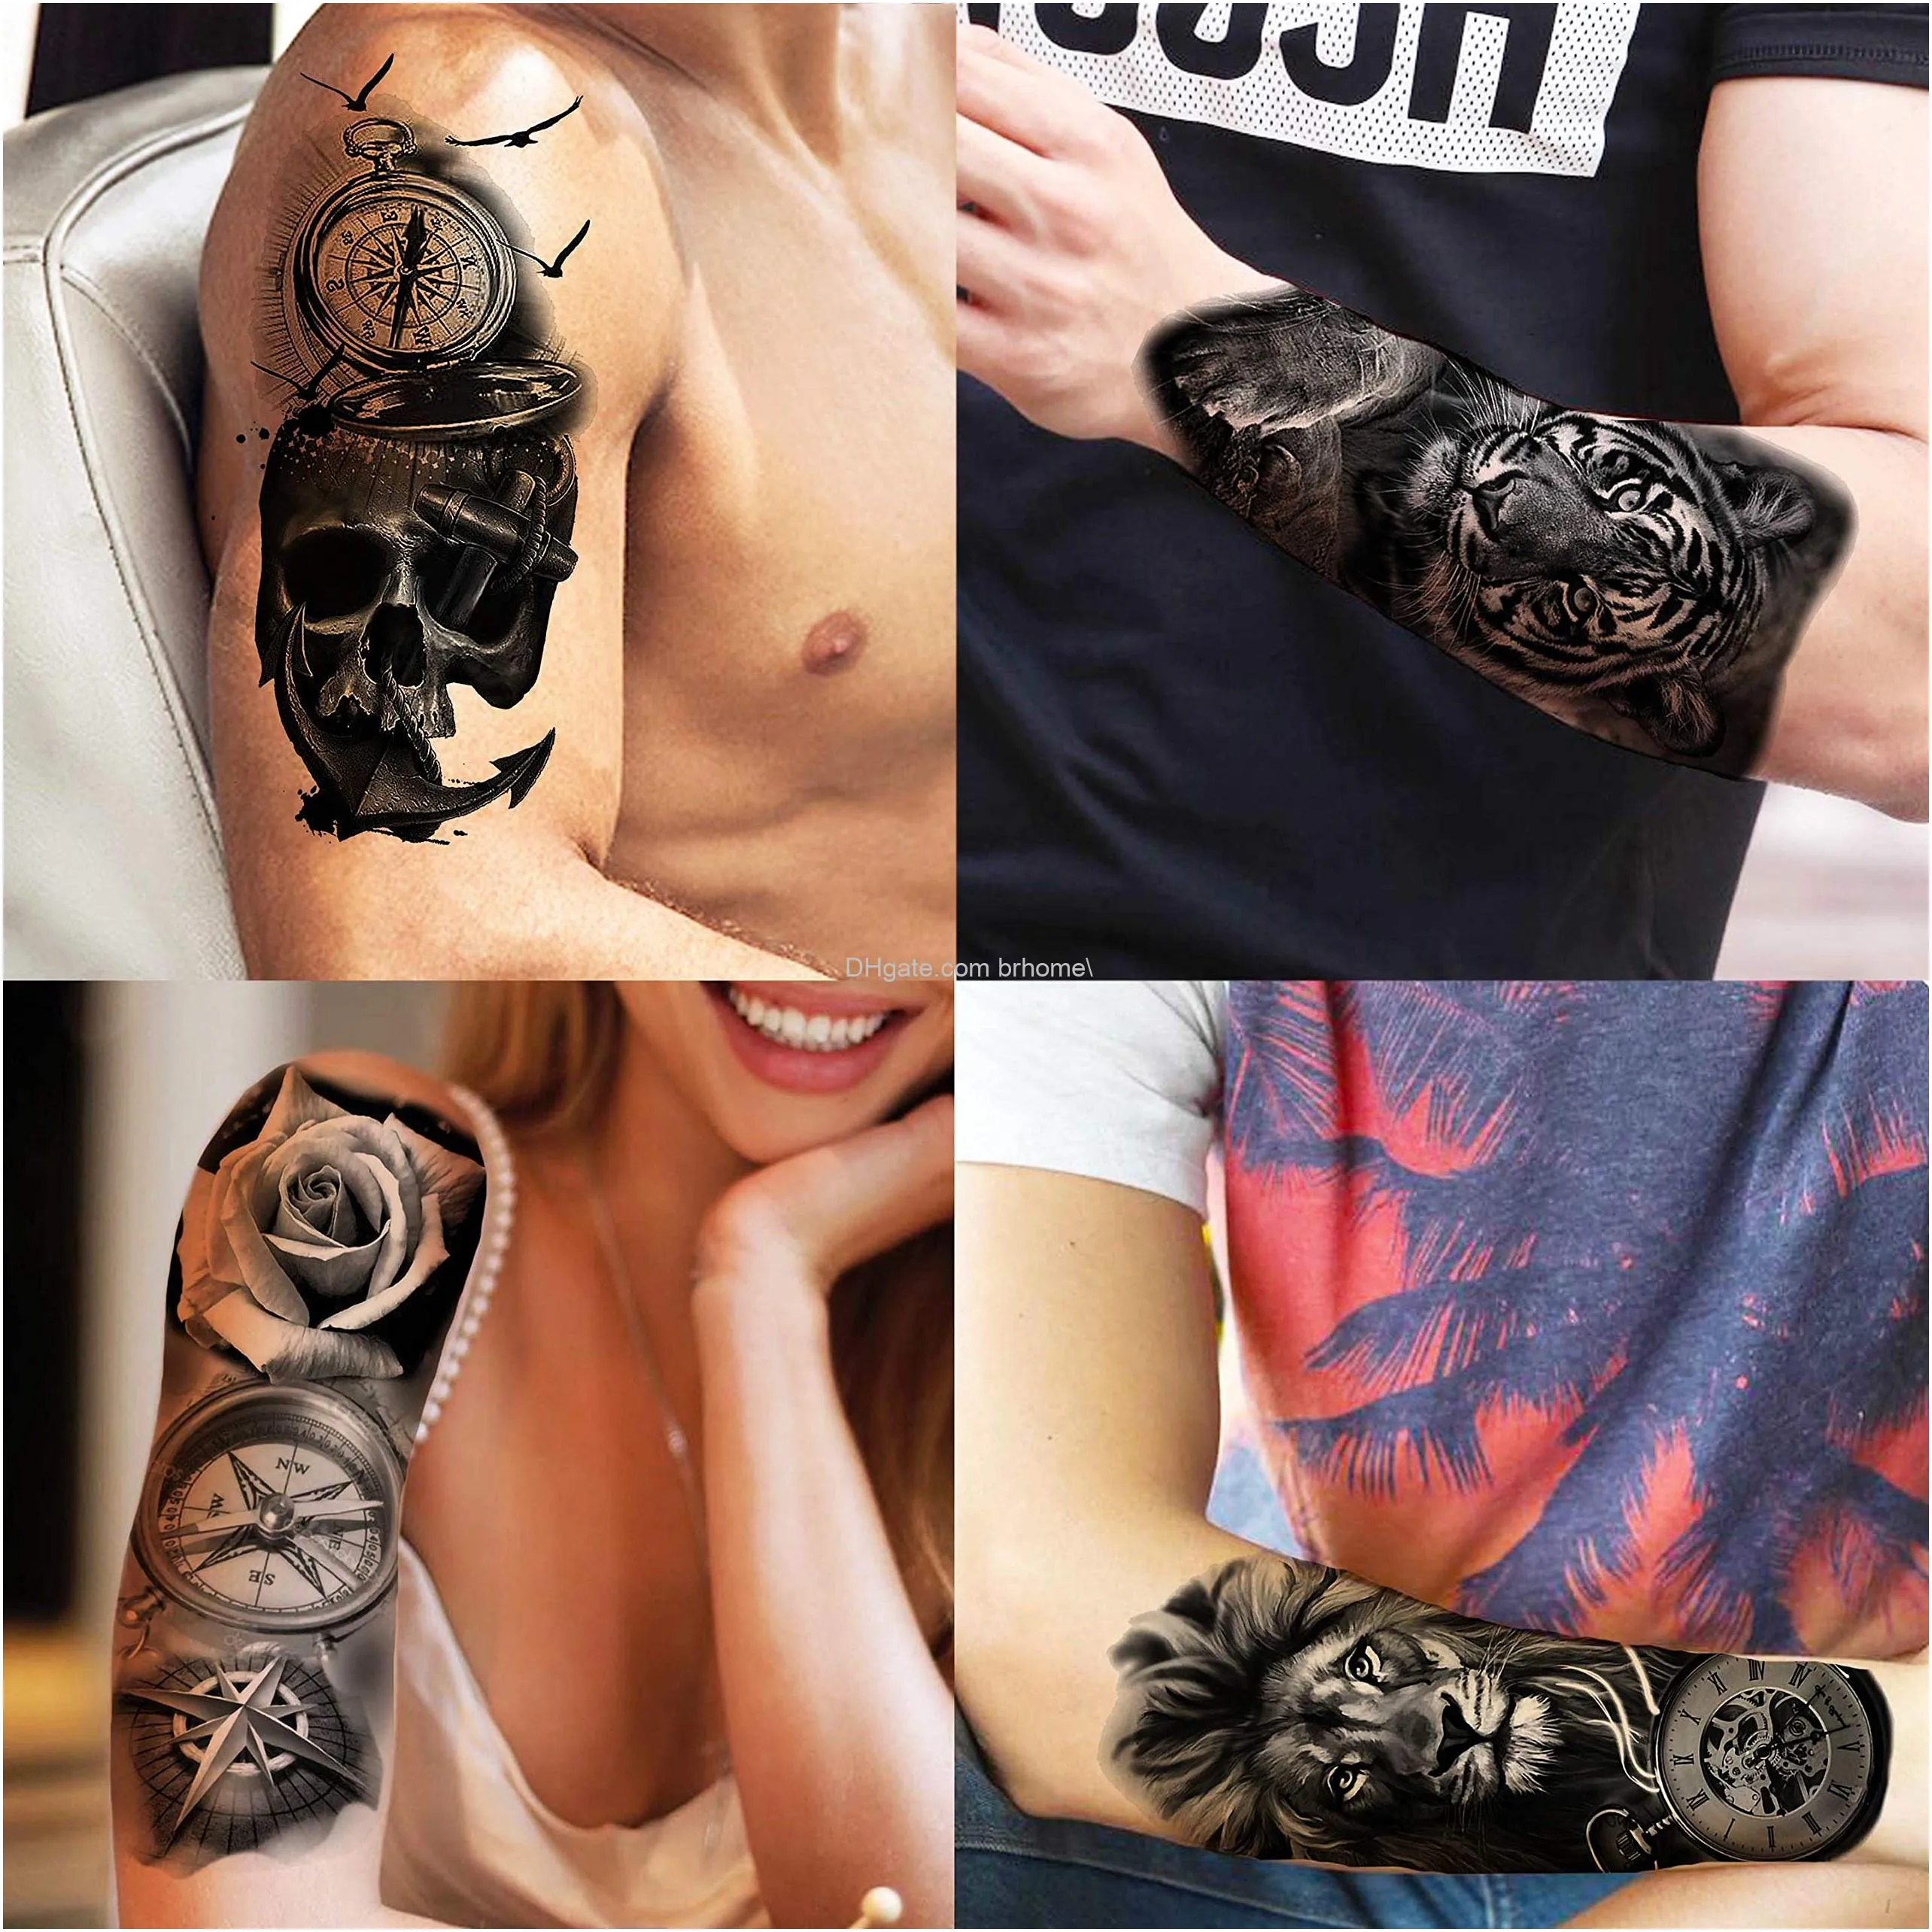 22 sheets sexy 3d temporary tattoos for women men arm forearm waterproof fake tattoo stickers for adults realistic tiger lion halloween skeleton rose flower tatoos warrior anchor compass